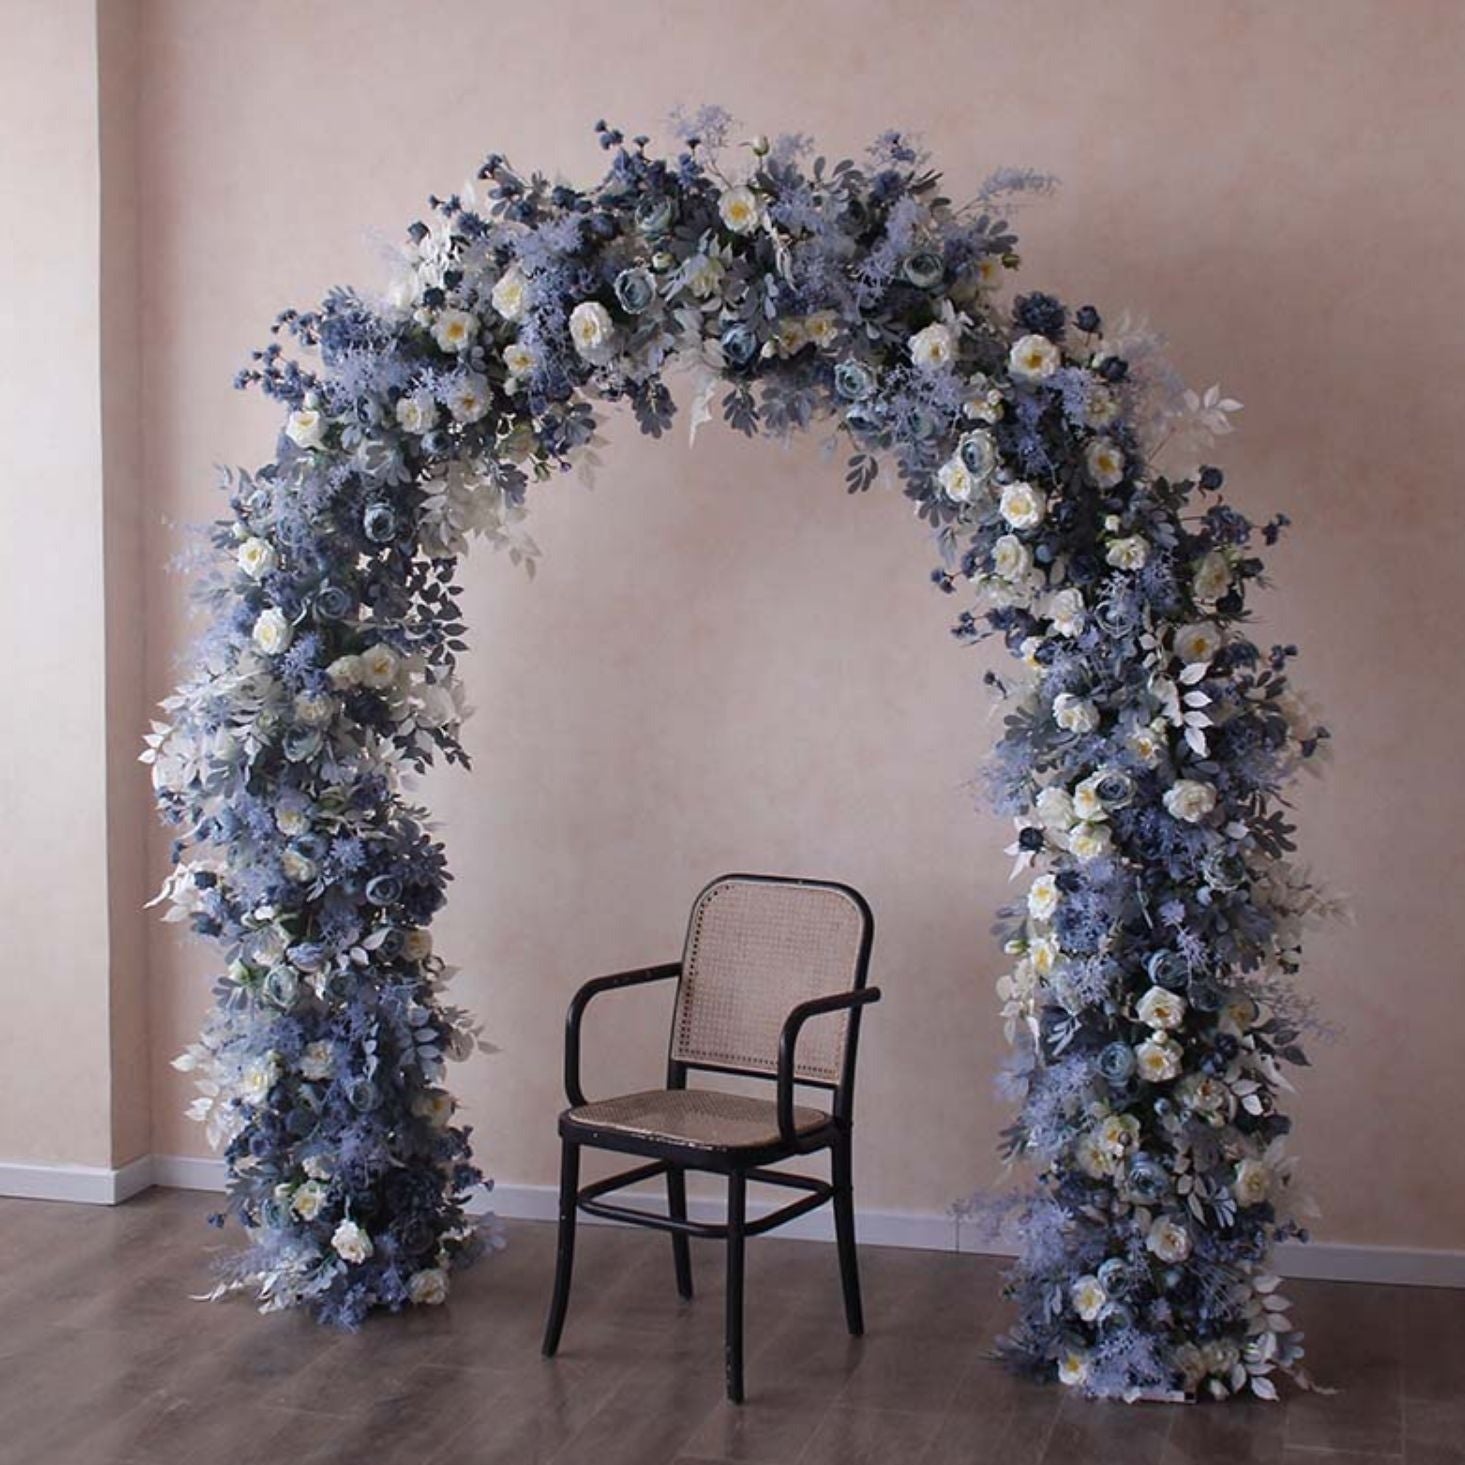 Z016:2023 New Wedding Party Background Floral Arch Decoration Including Frame Rose Morning